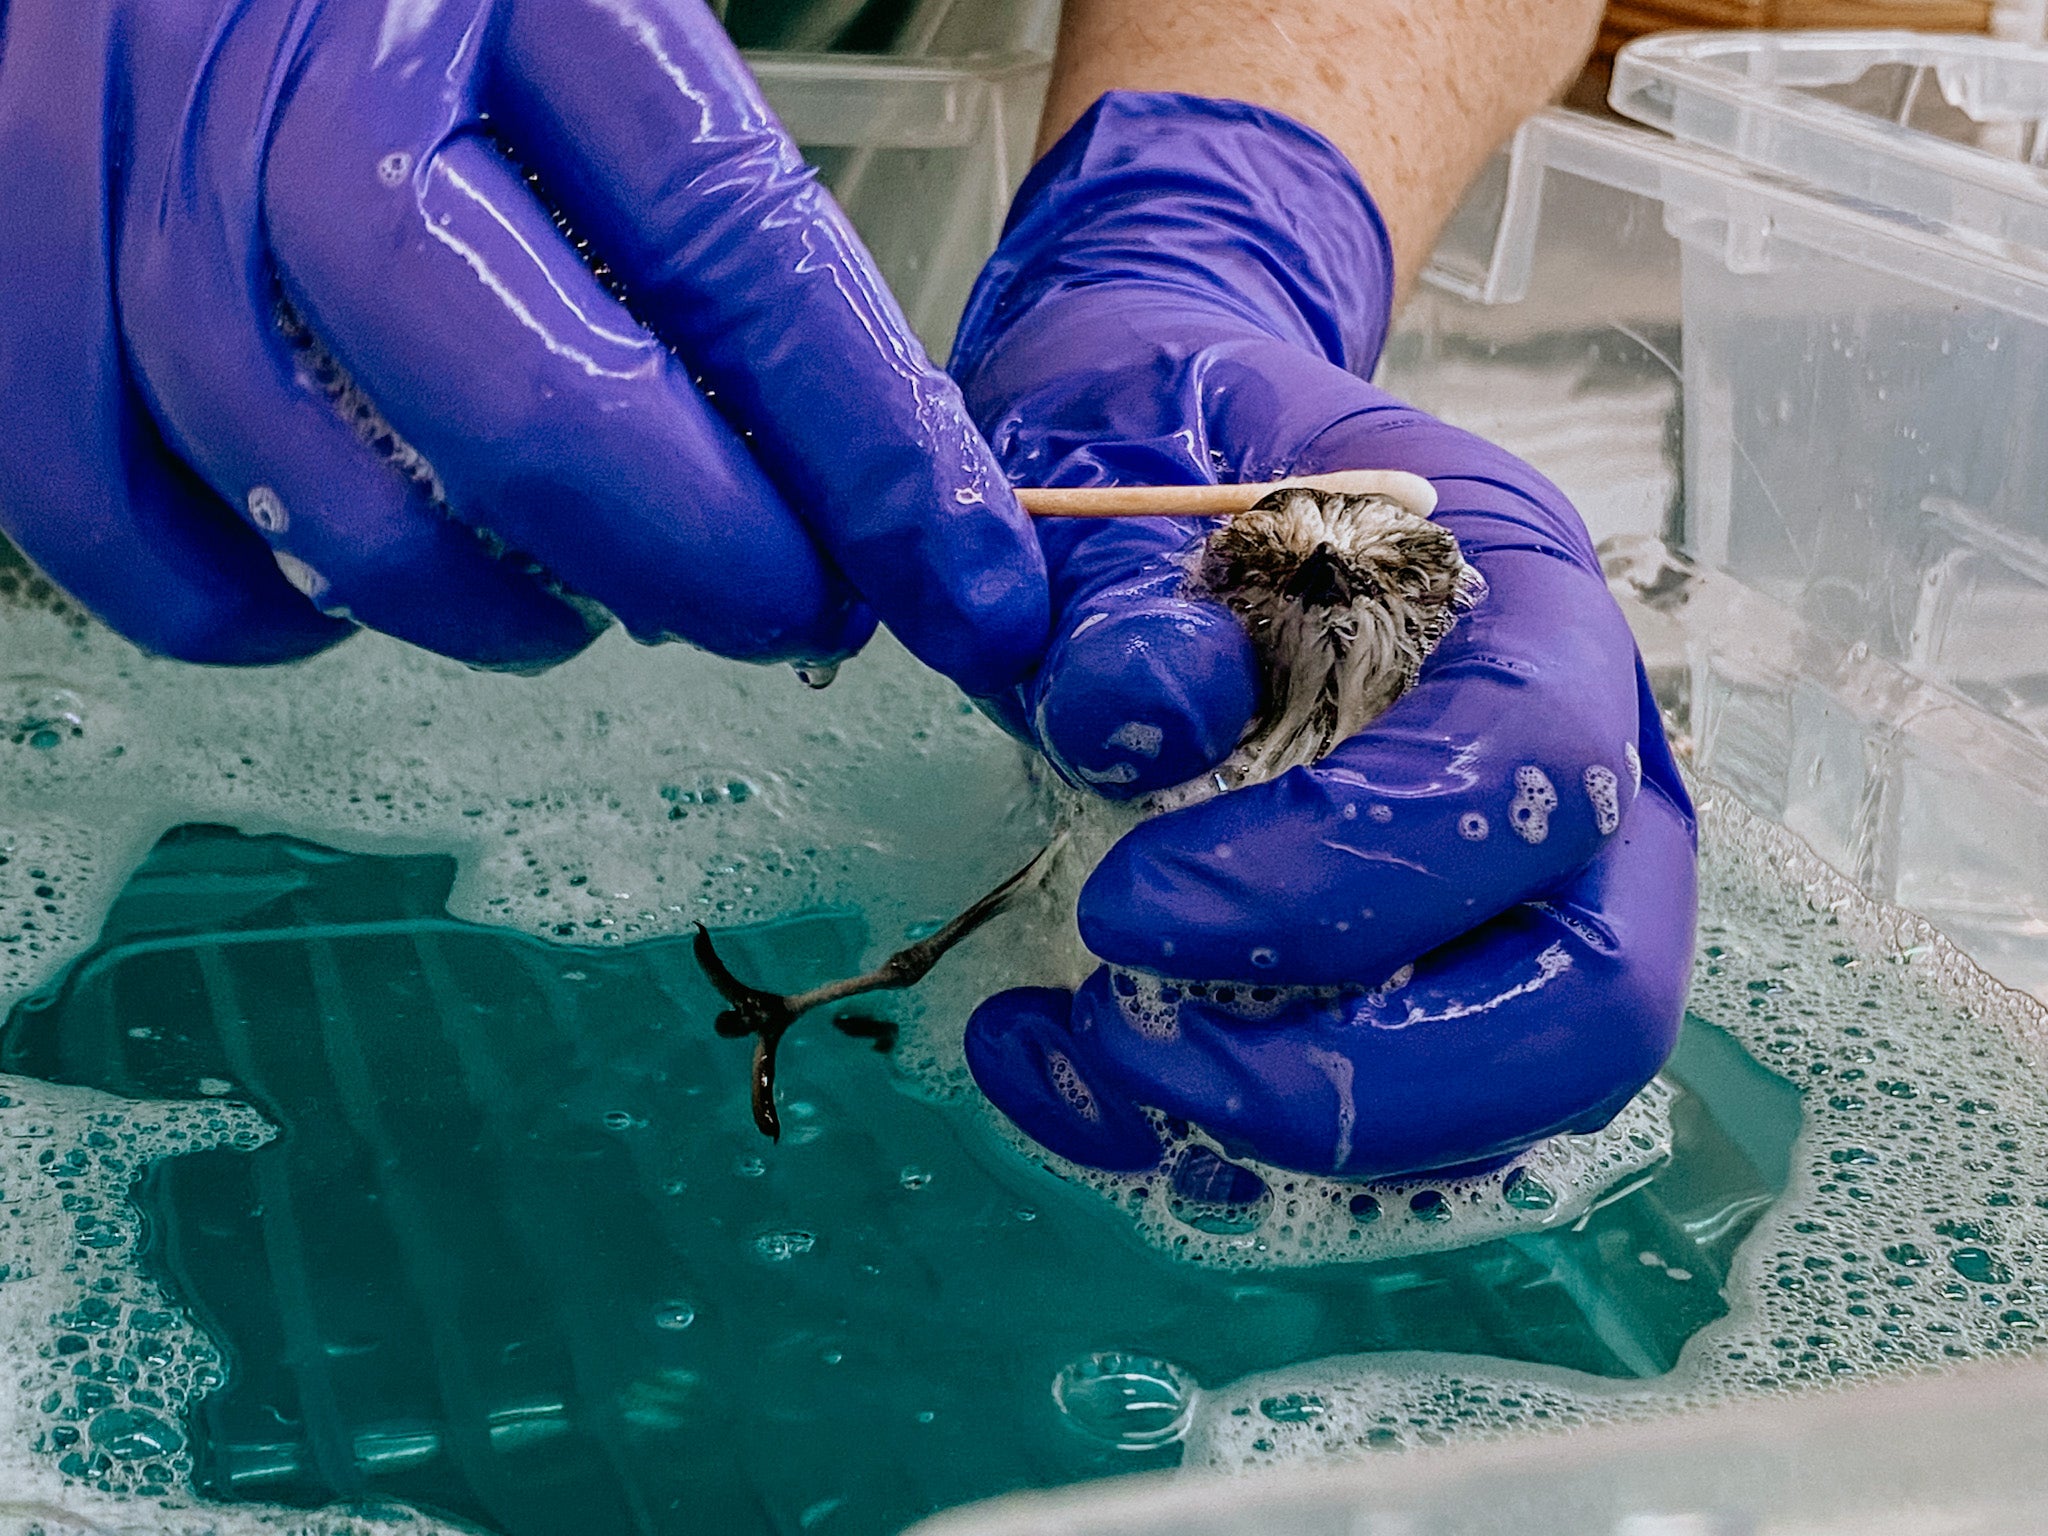 oiled snowy plover being washed in blue sudsy water by hands wearing purple gloves